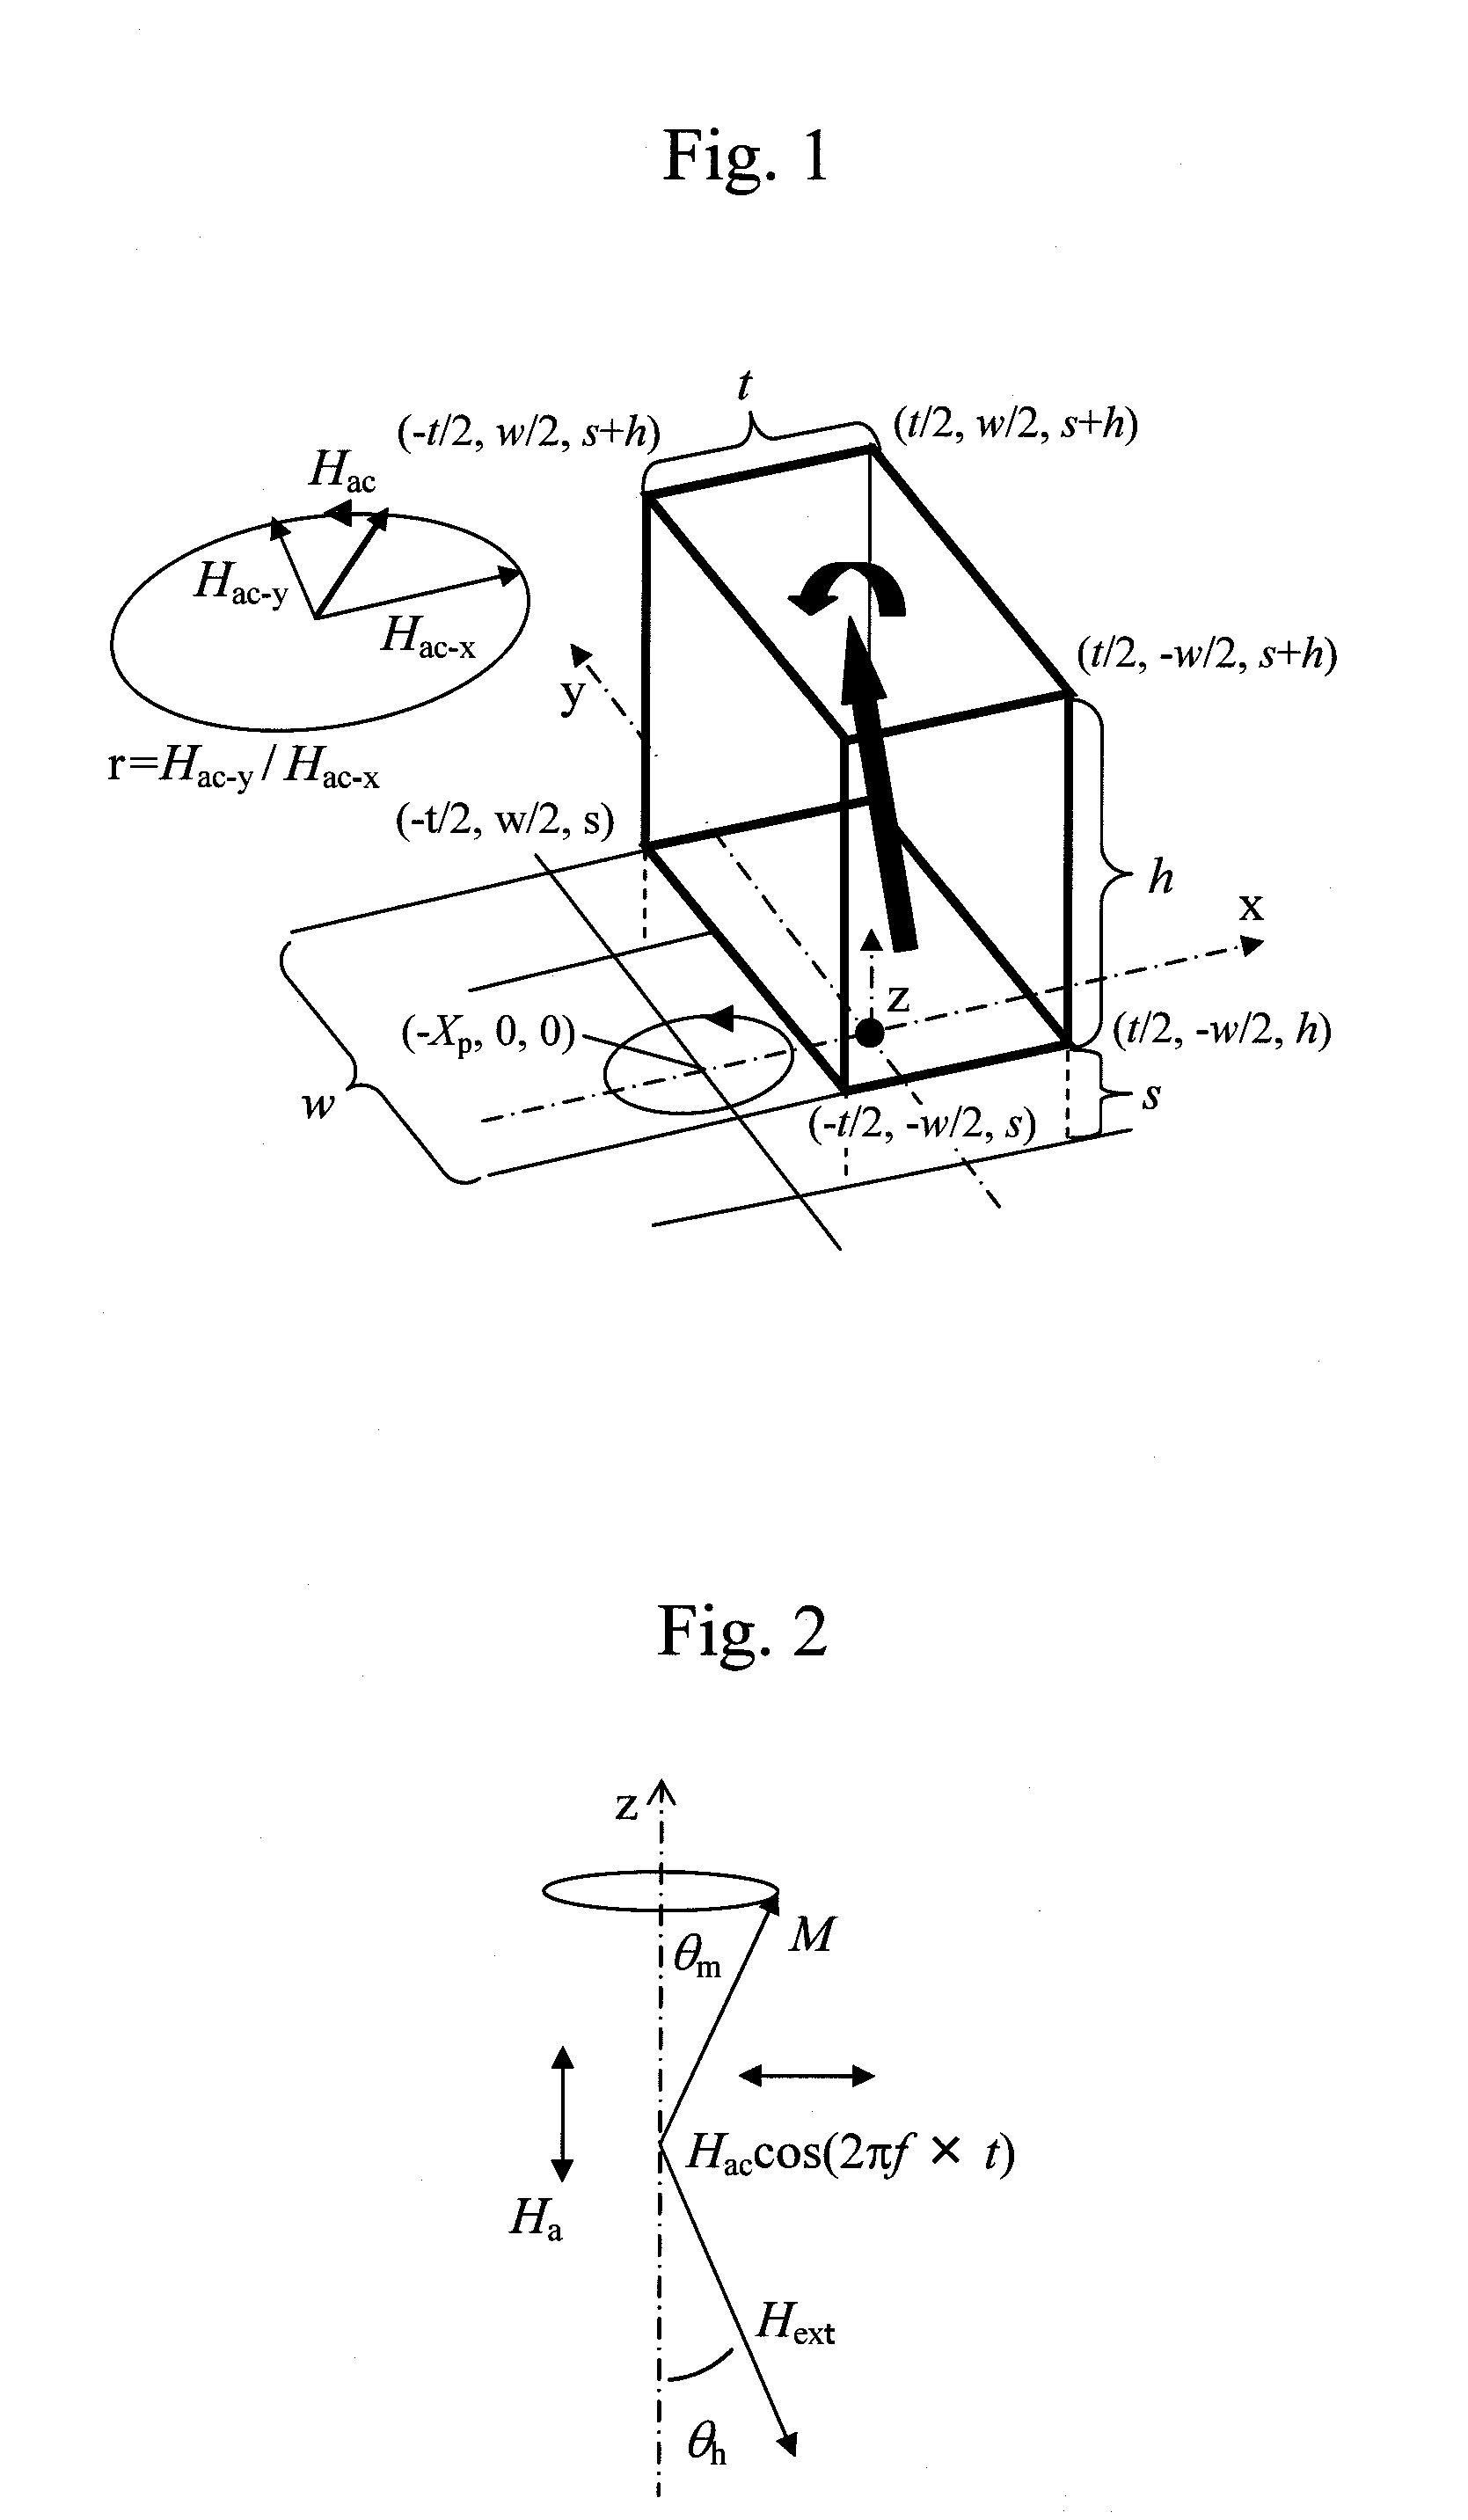 Information recording device